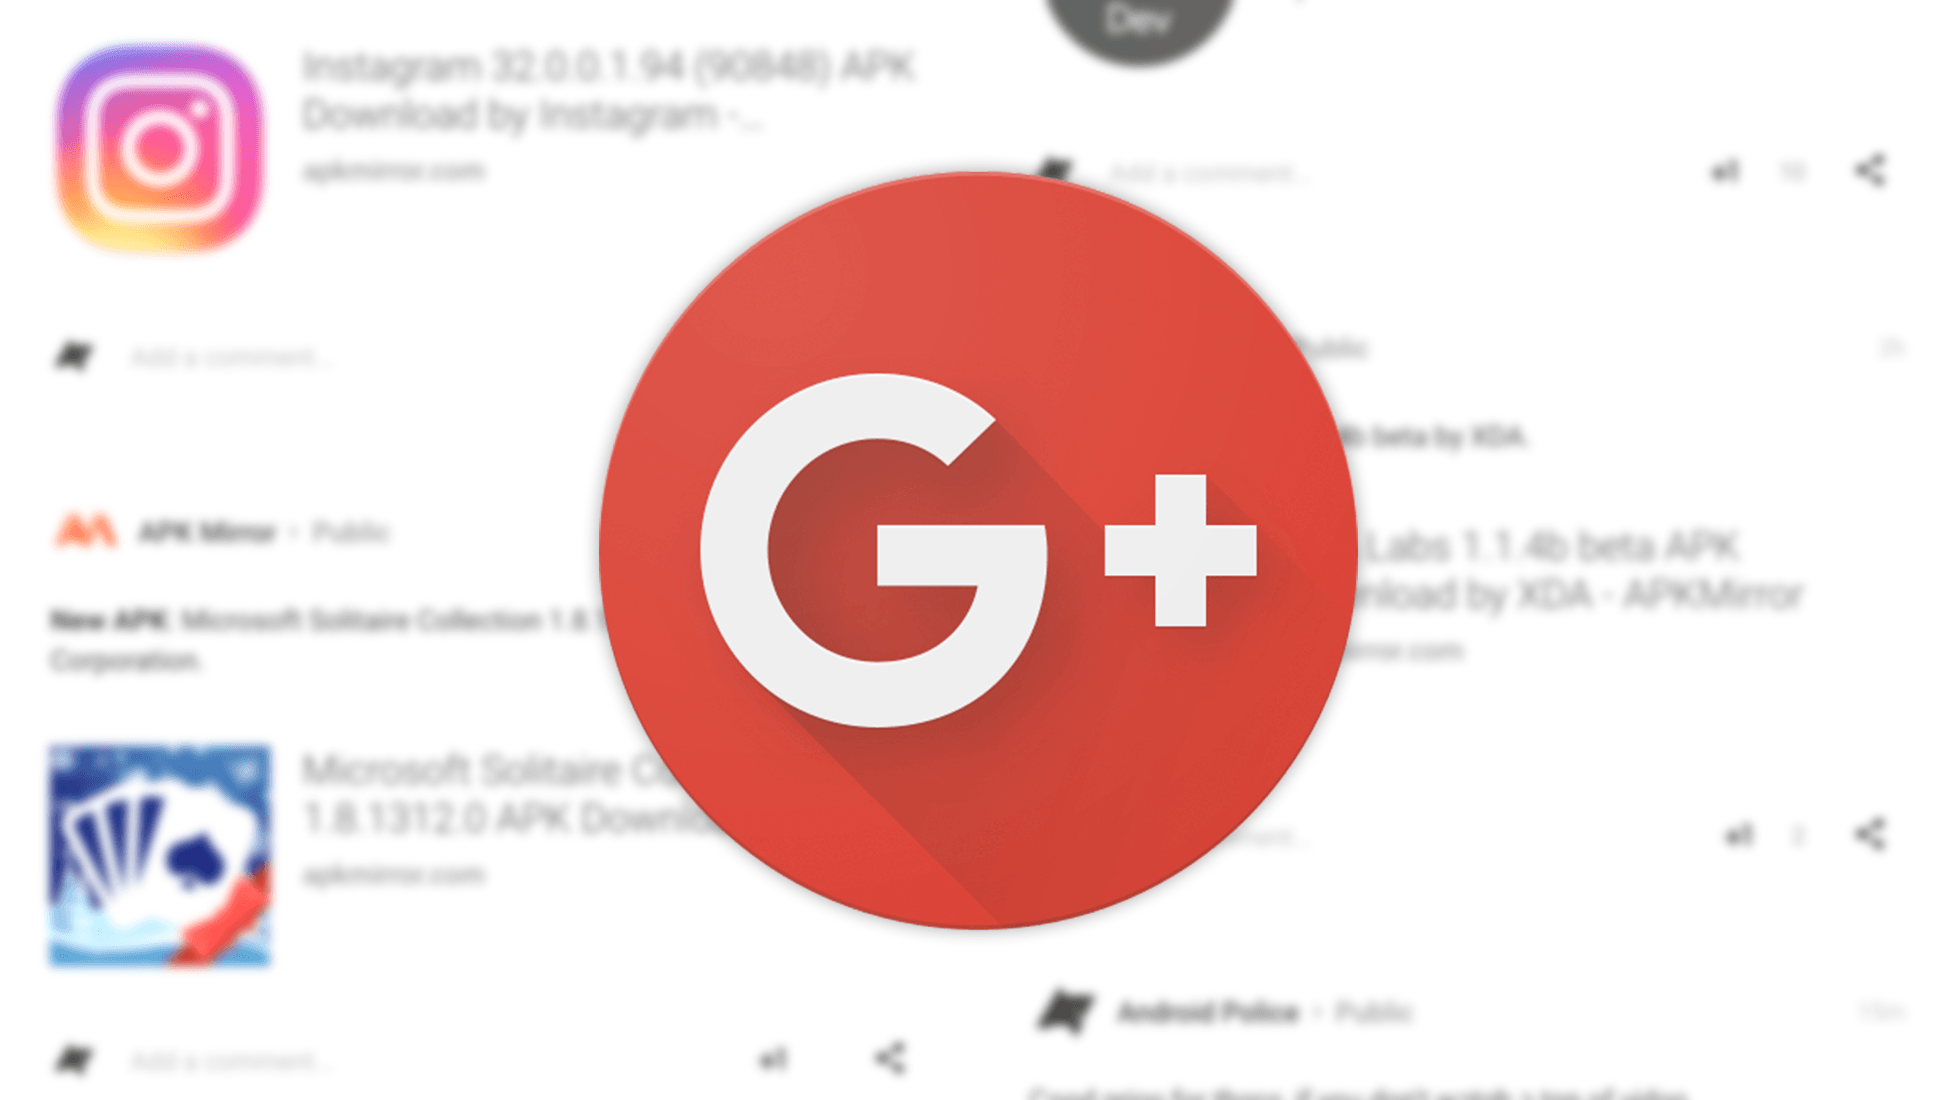 Small Google Plus Logo - Google Plus Archives - Android Police - Android news, reviews, apps ...